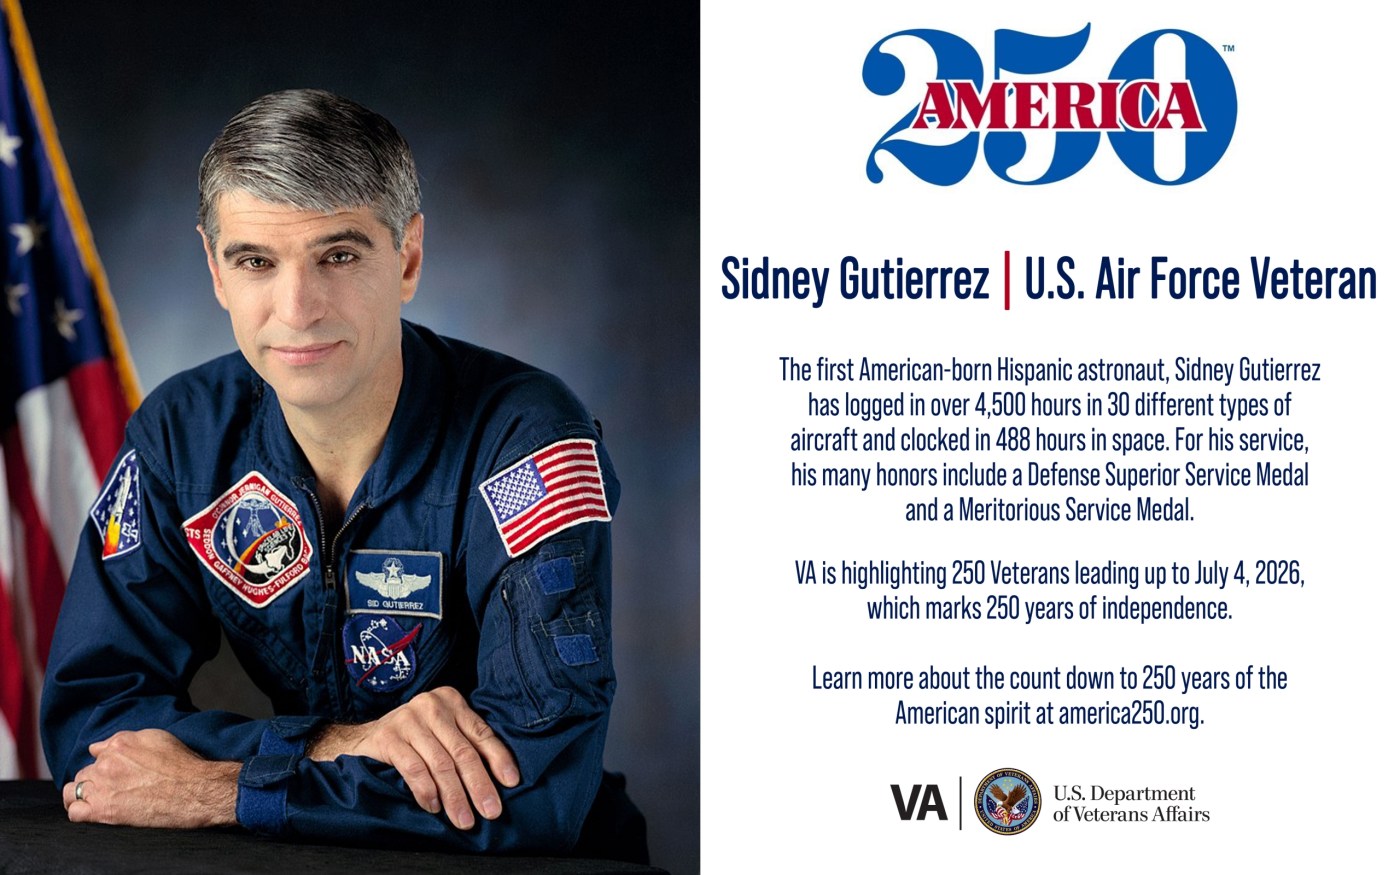 This week’s America250 salute is Air Force Veteran Sidney Gutierrez, who served as an F-16 test pilot before becoming the first Hispanic American NASA astronaut.